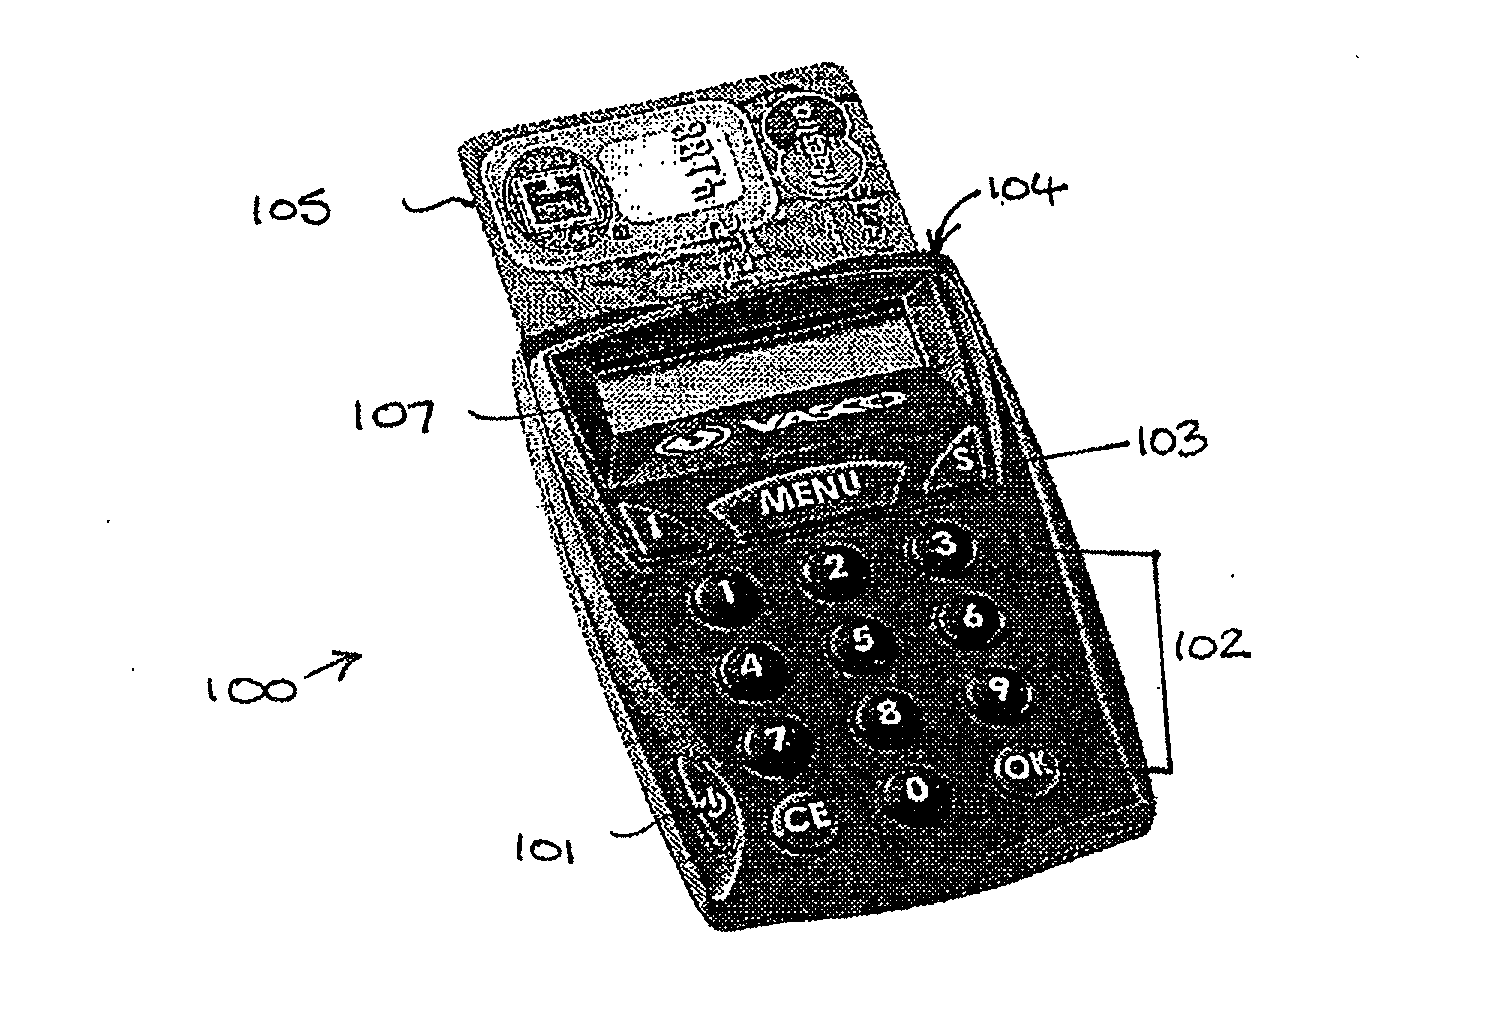 Field programmable smart card terminal and token device